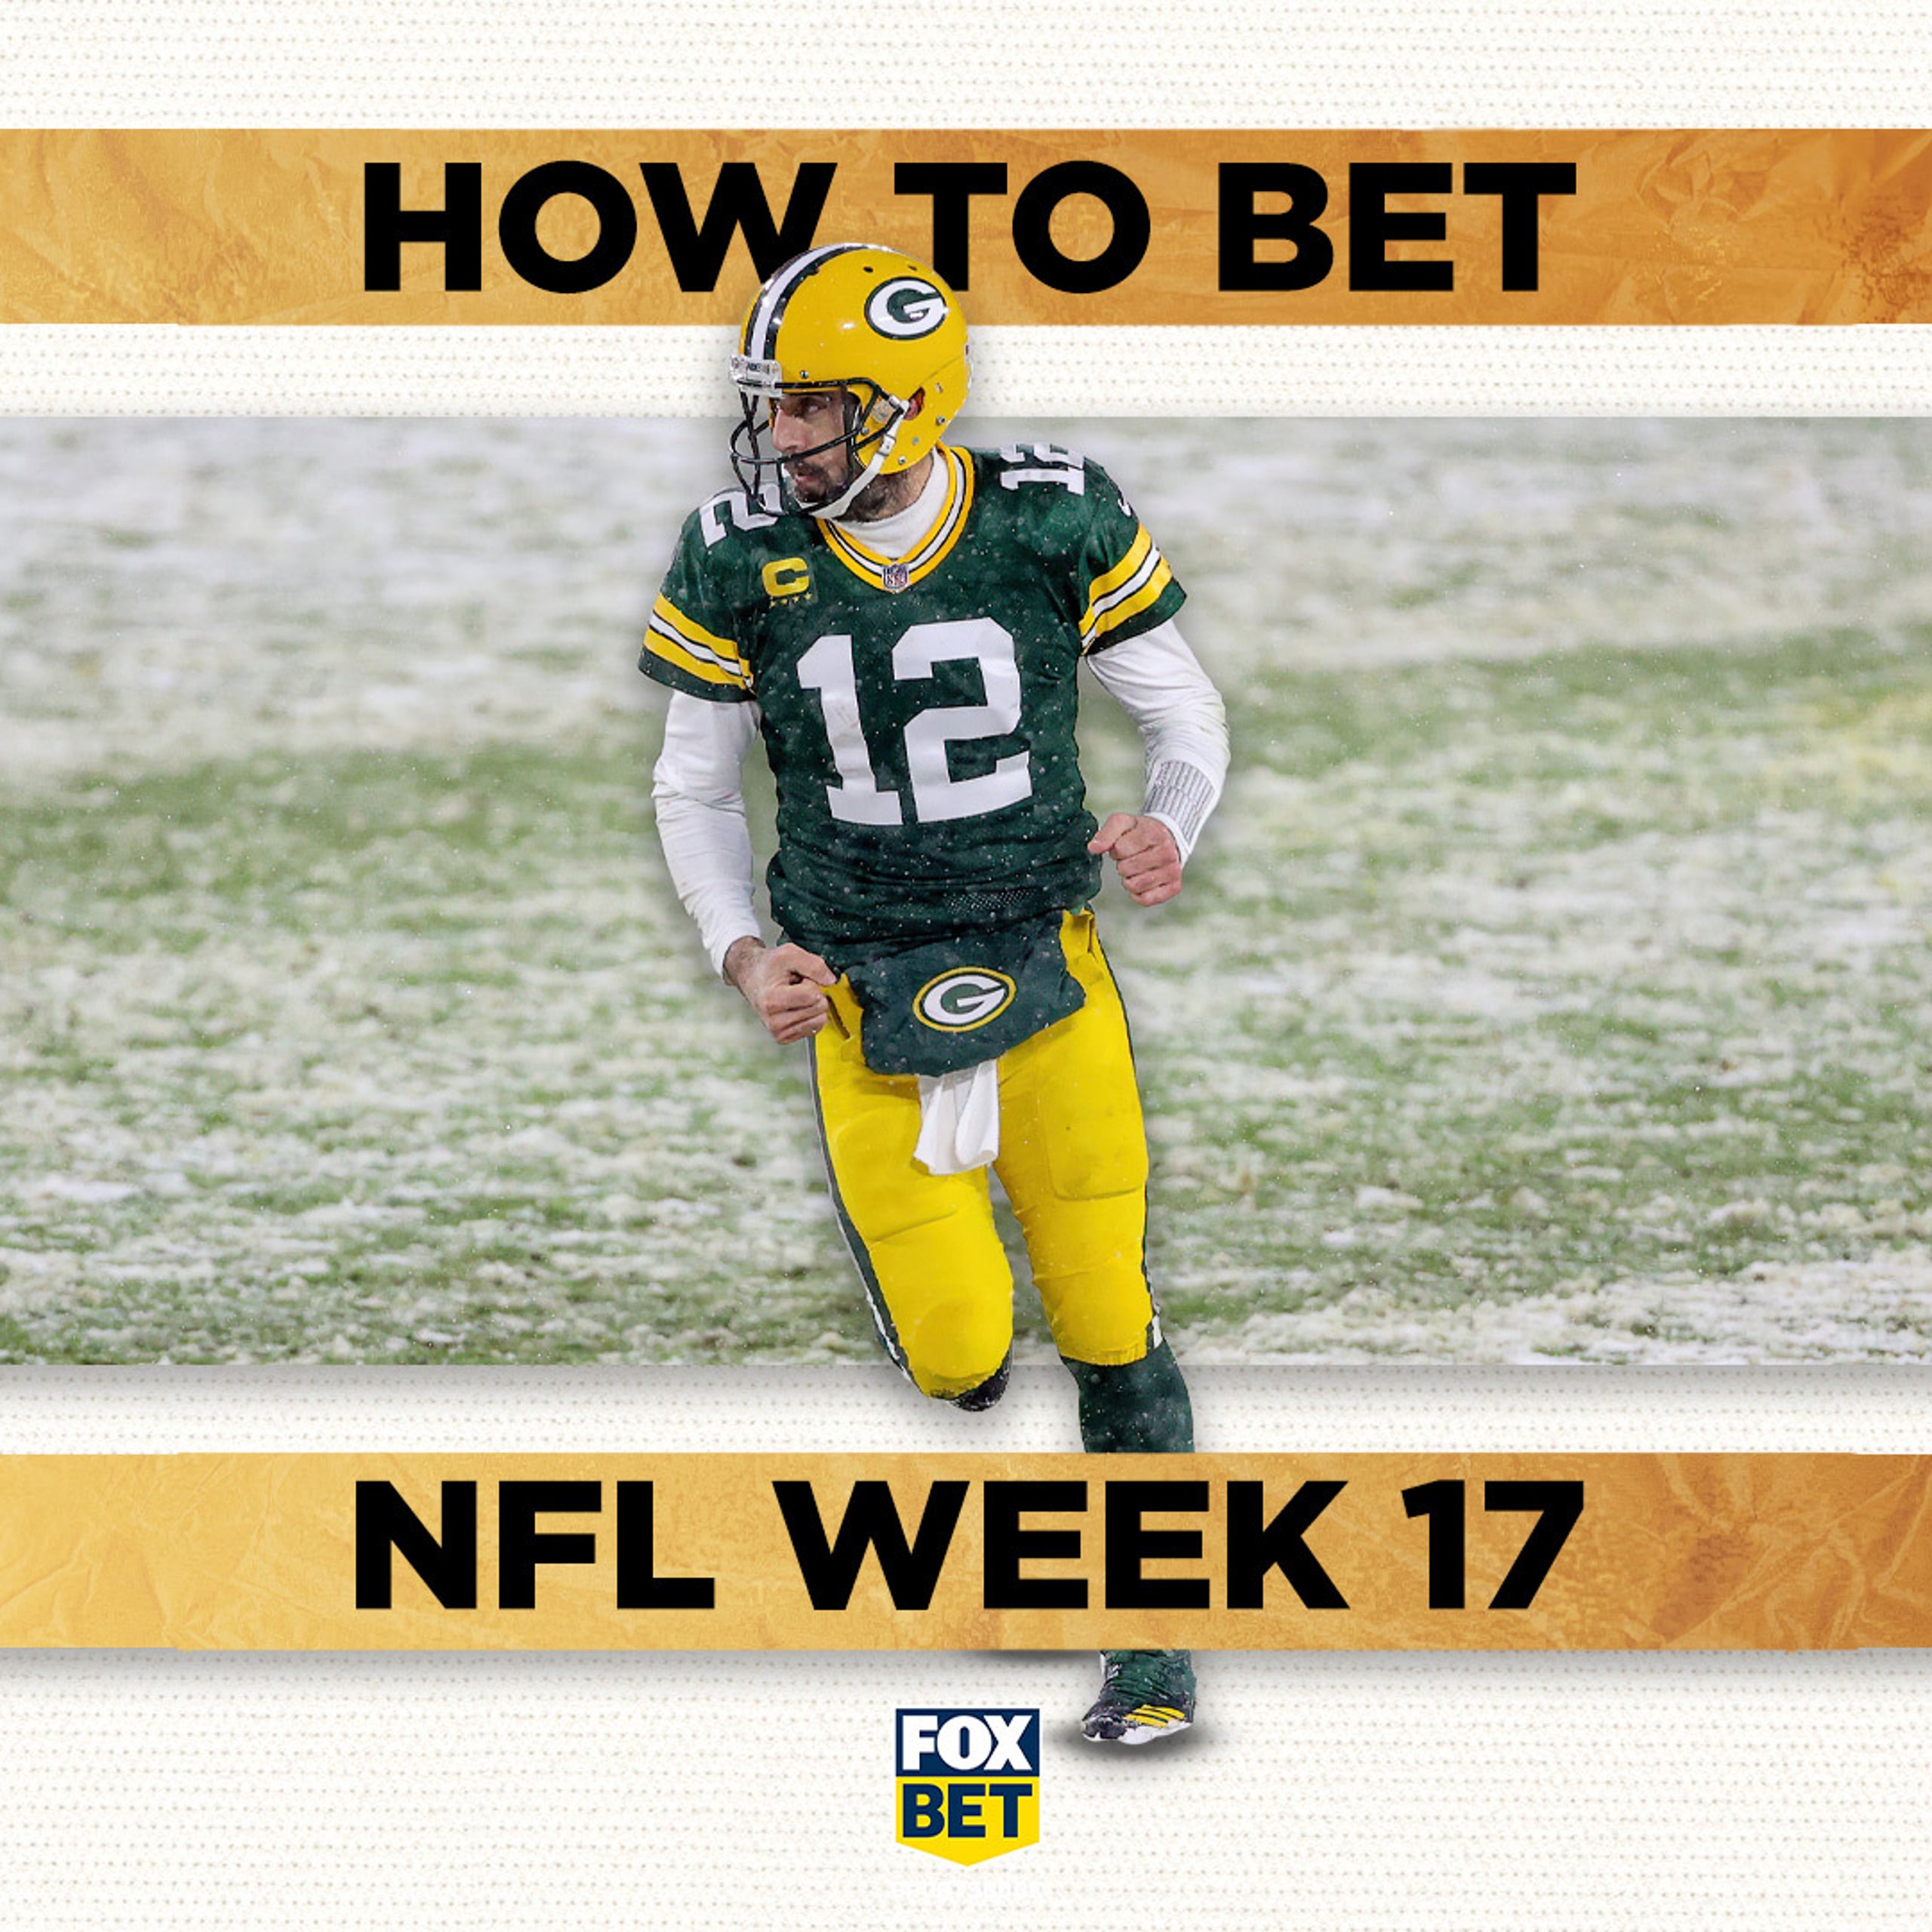 how to bet on nfl games online